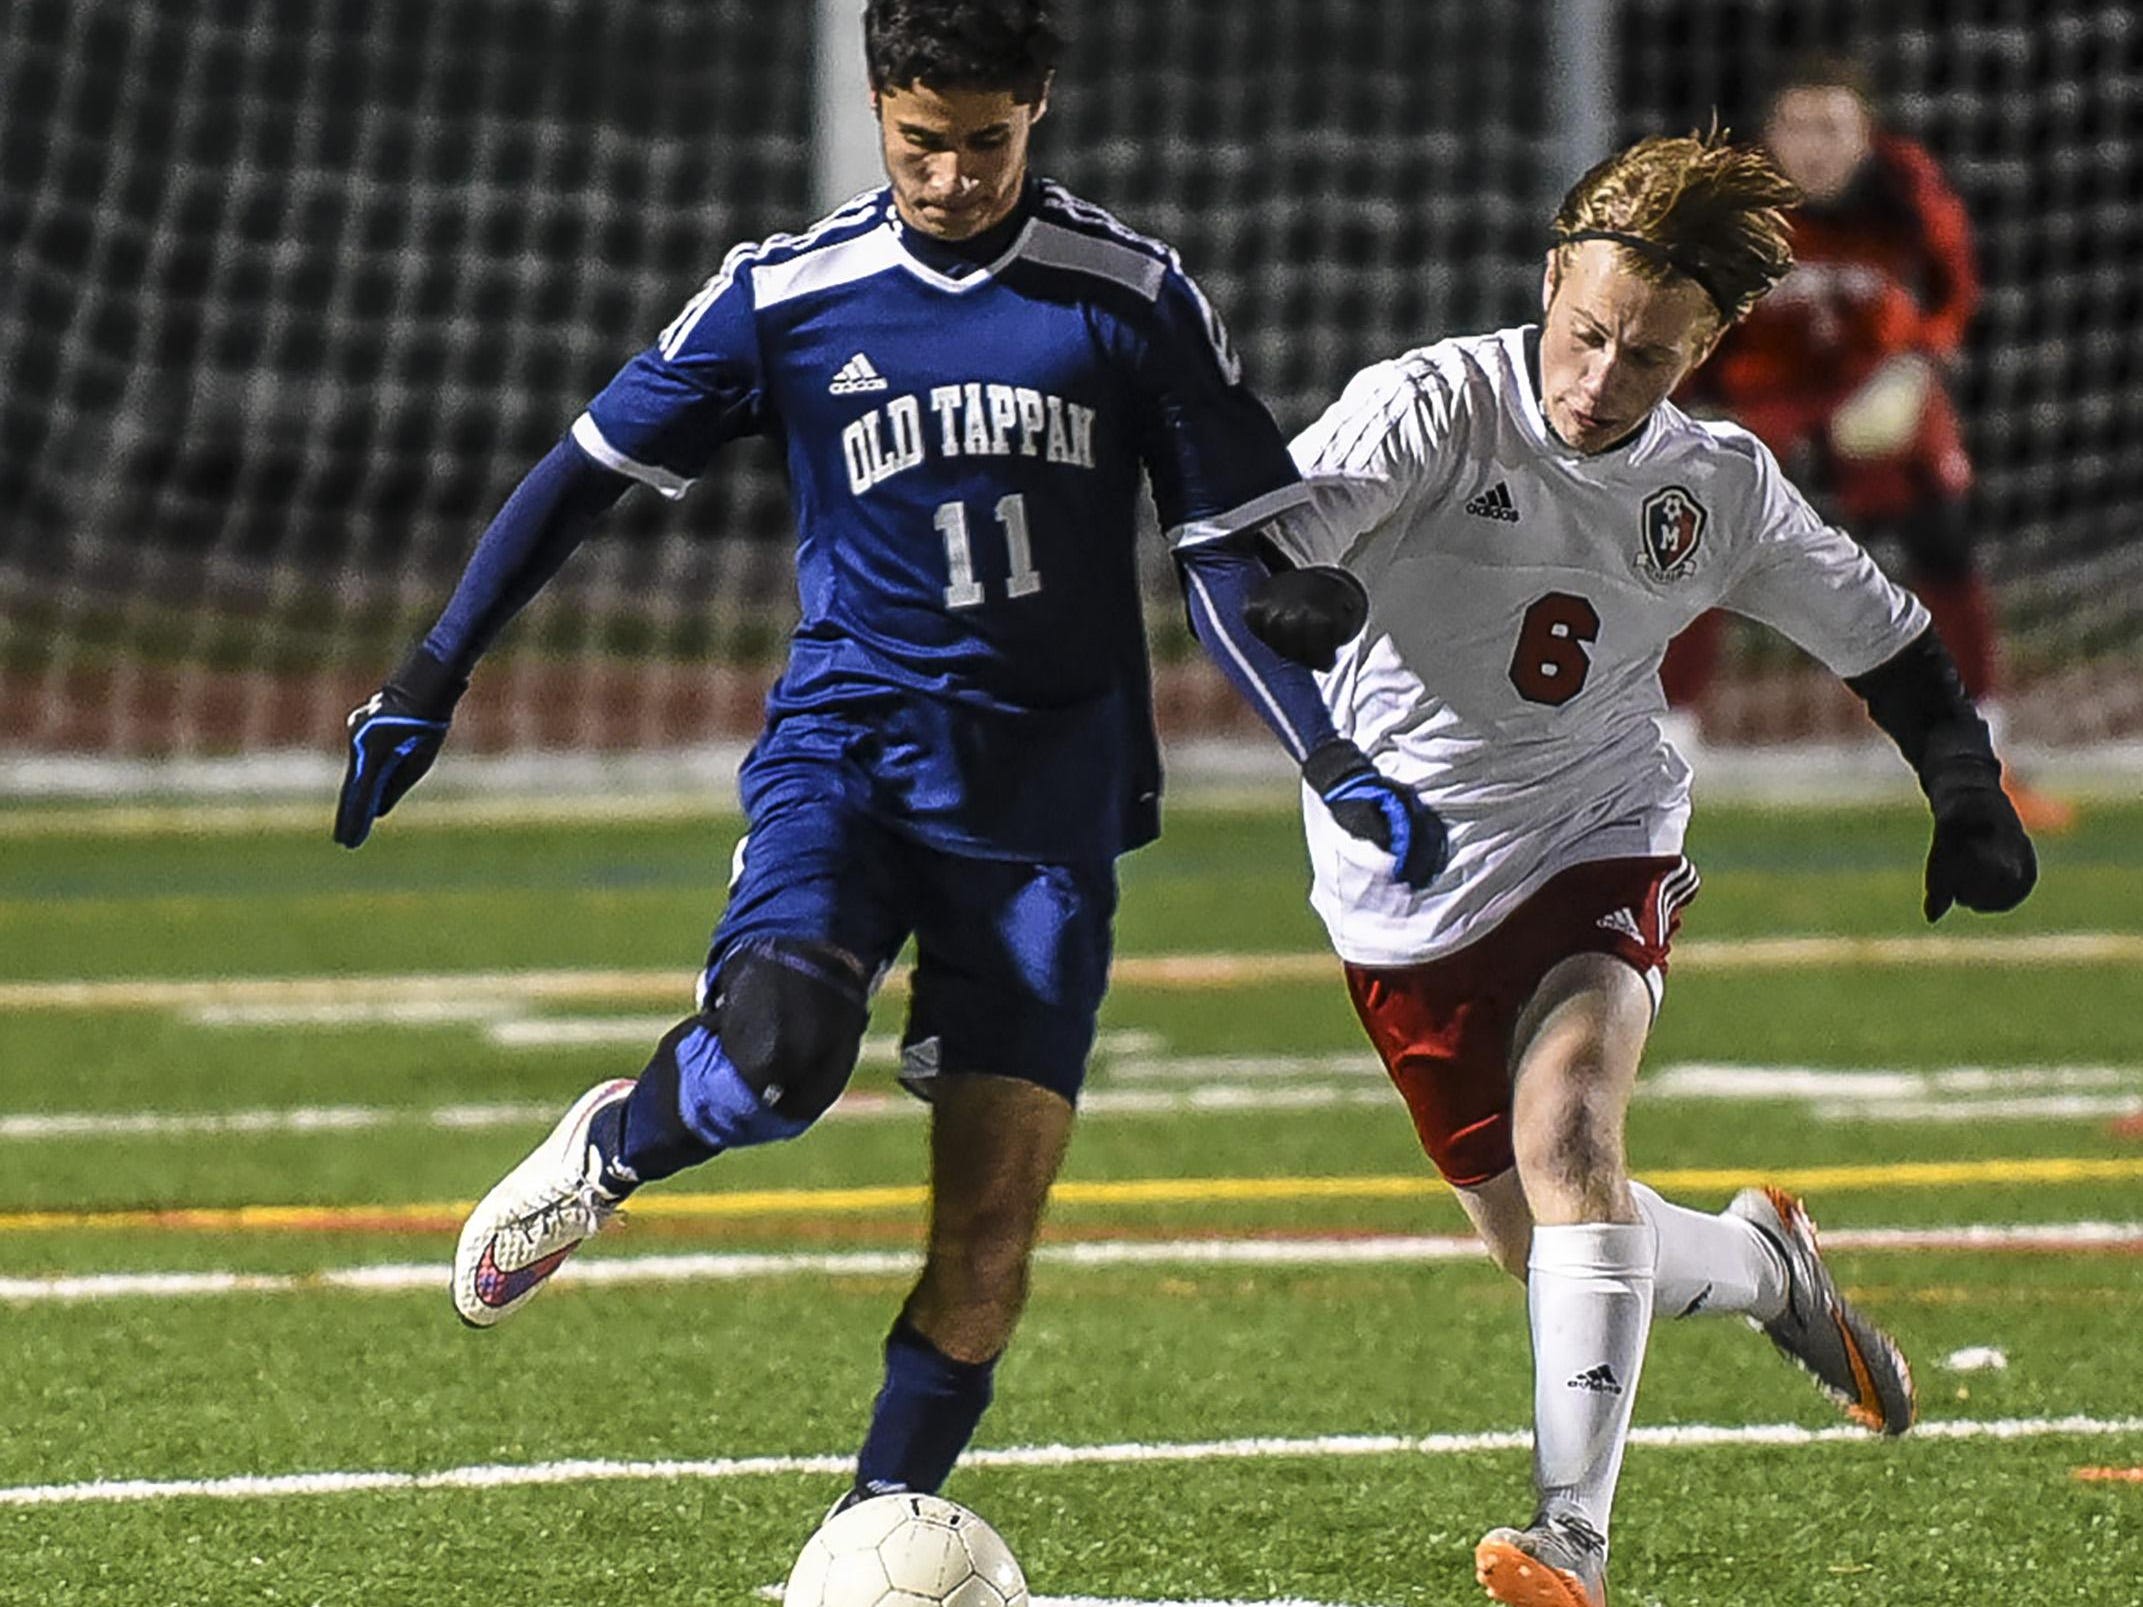 Old Tappan's Conor Kelly (10) and Mendham's Matt Hanks (6) vie for the ball in the NJSIAA Group III Semifinal at Ridge High School in Basking Ridge, November 17, 2015. Photo by Warren Wetura for the Daily Record.